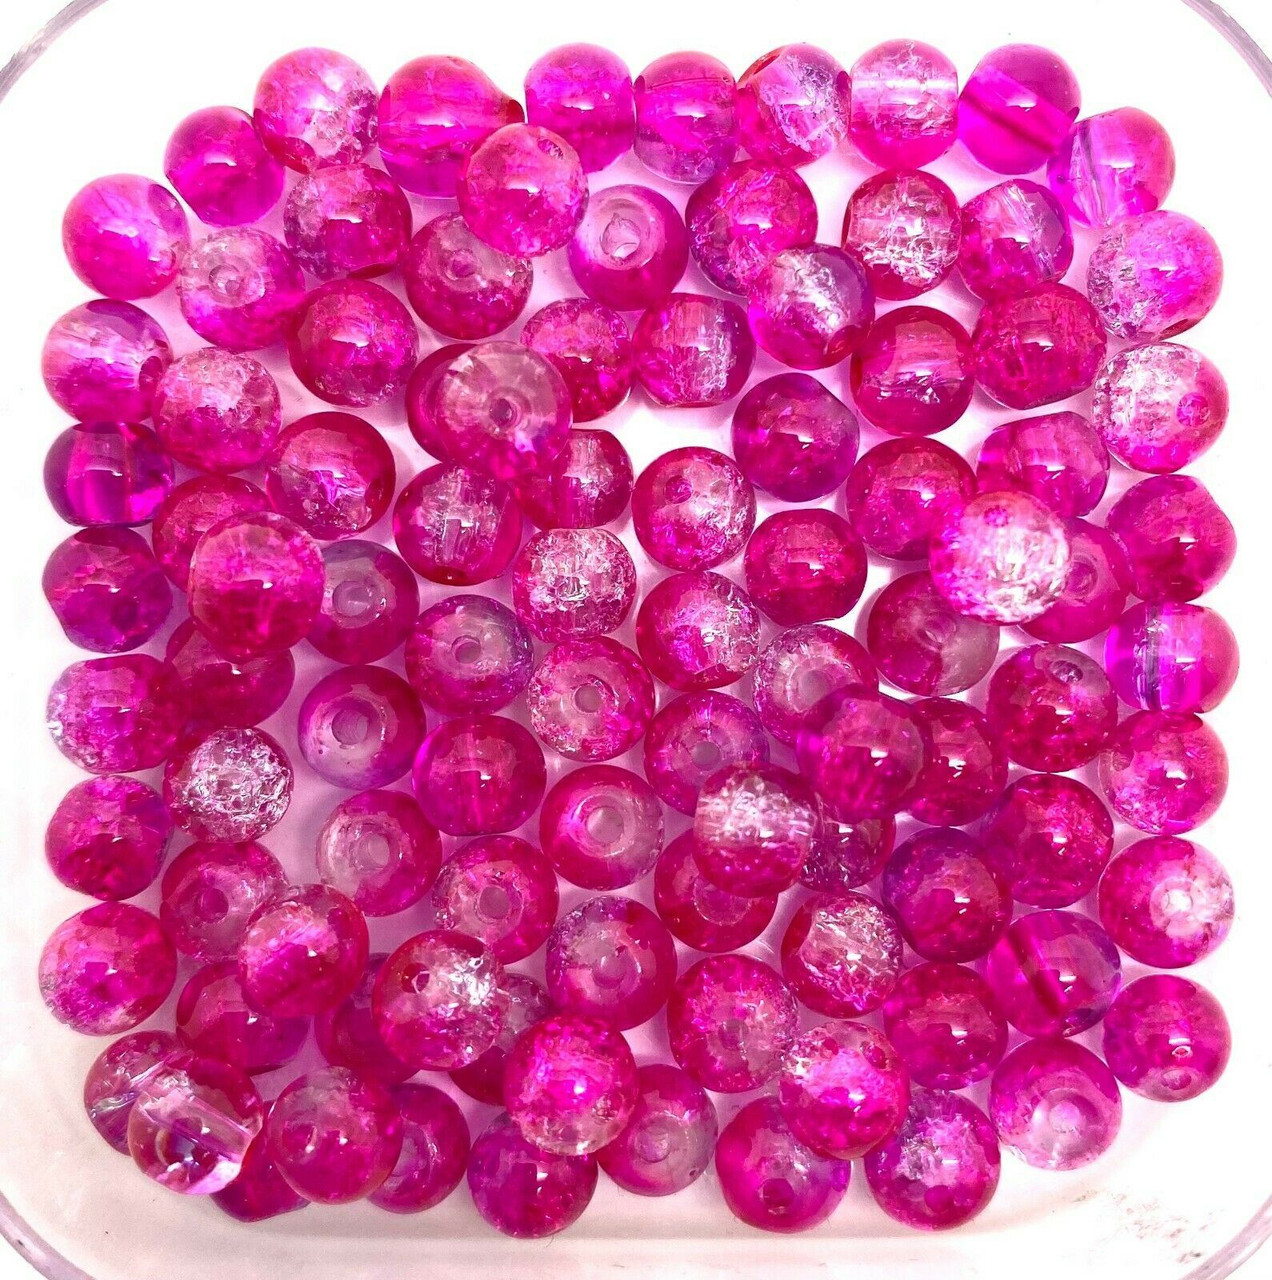 10mm Crackle Glass Beads - Hot Pink & Clear, 40 beads